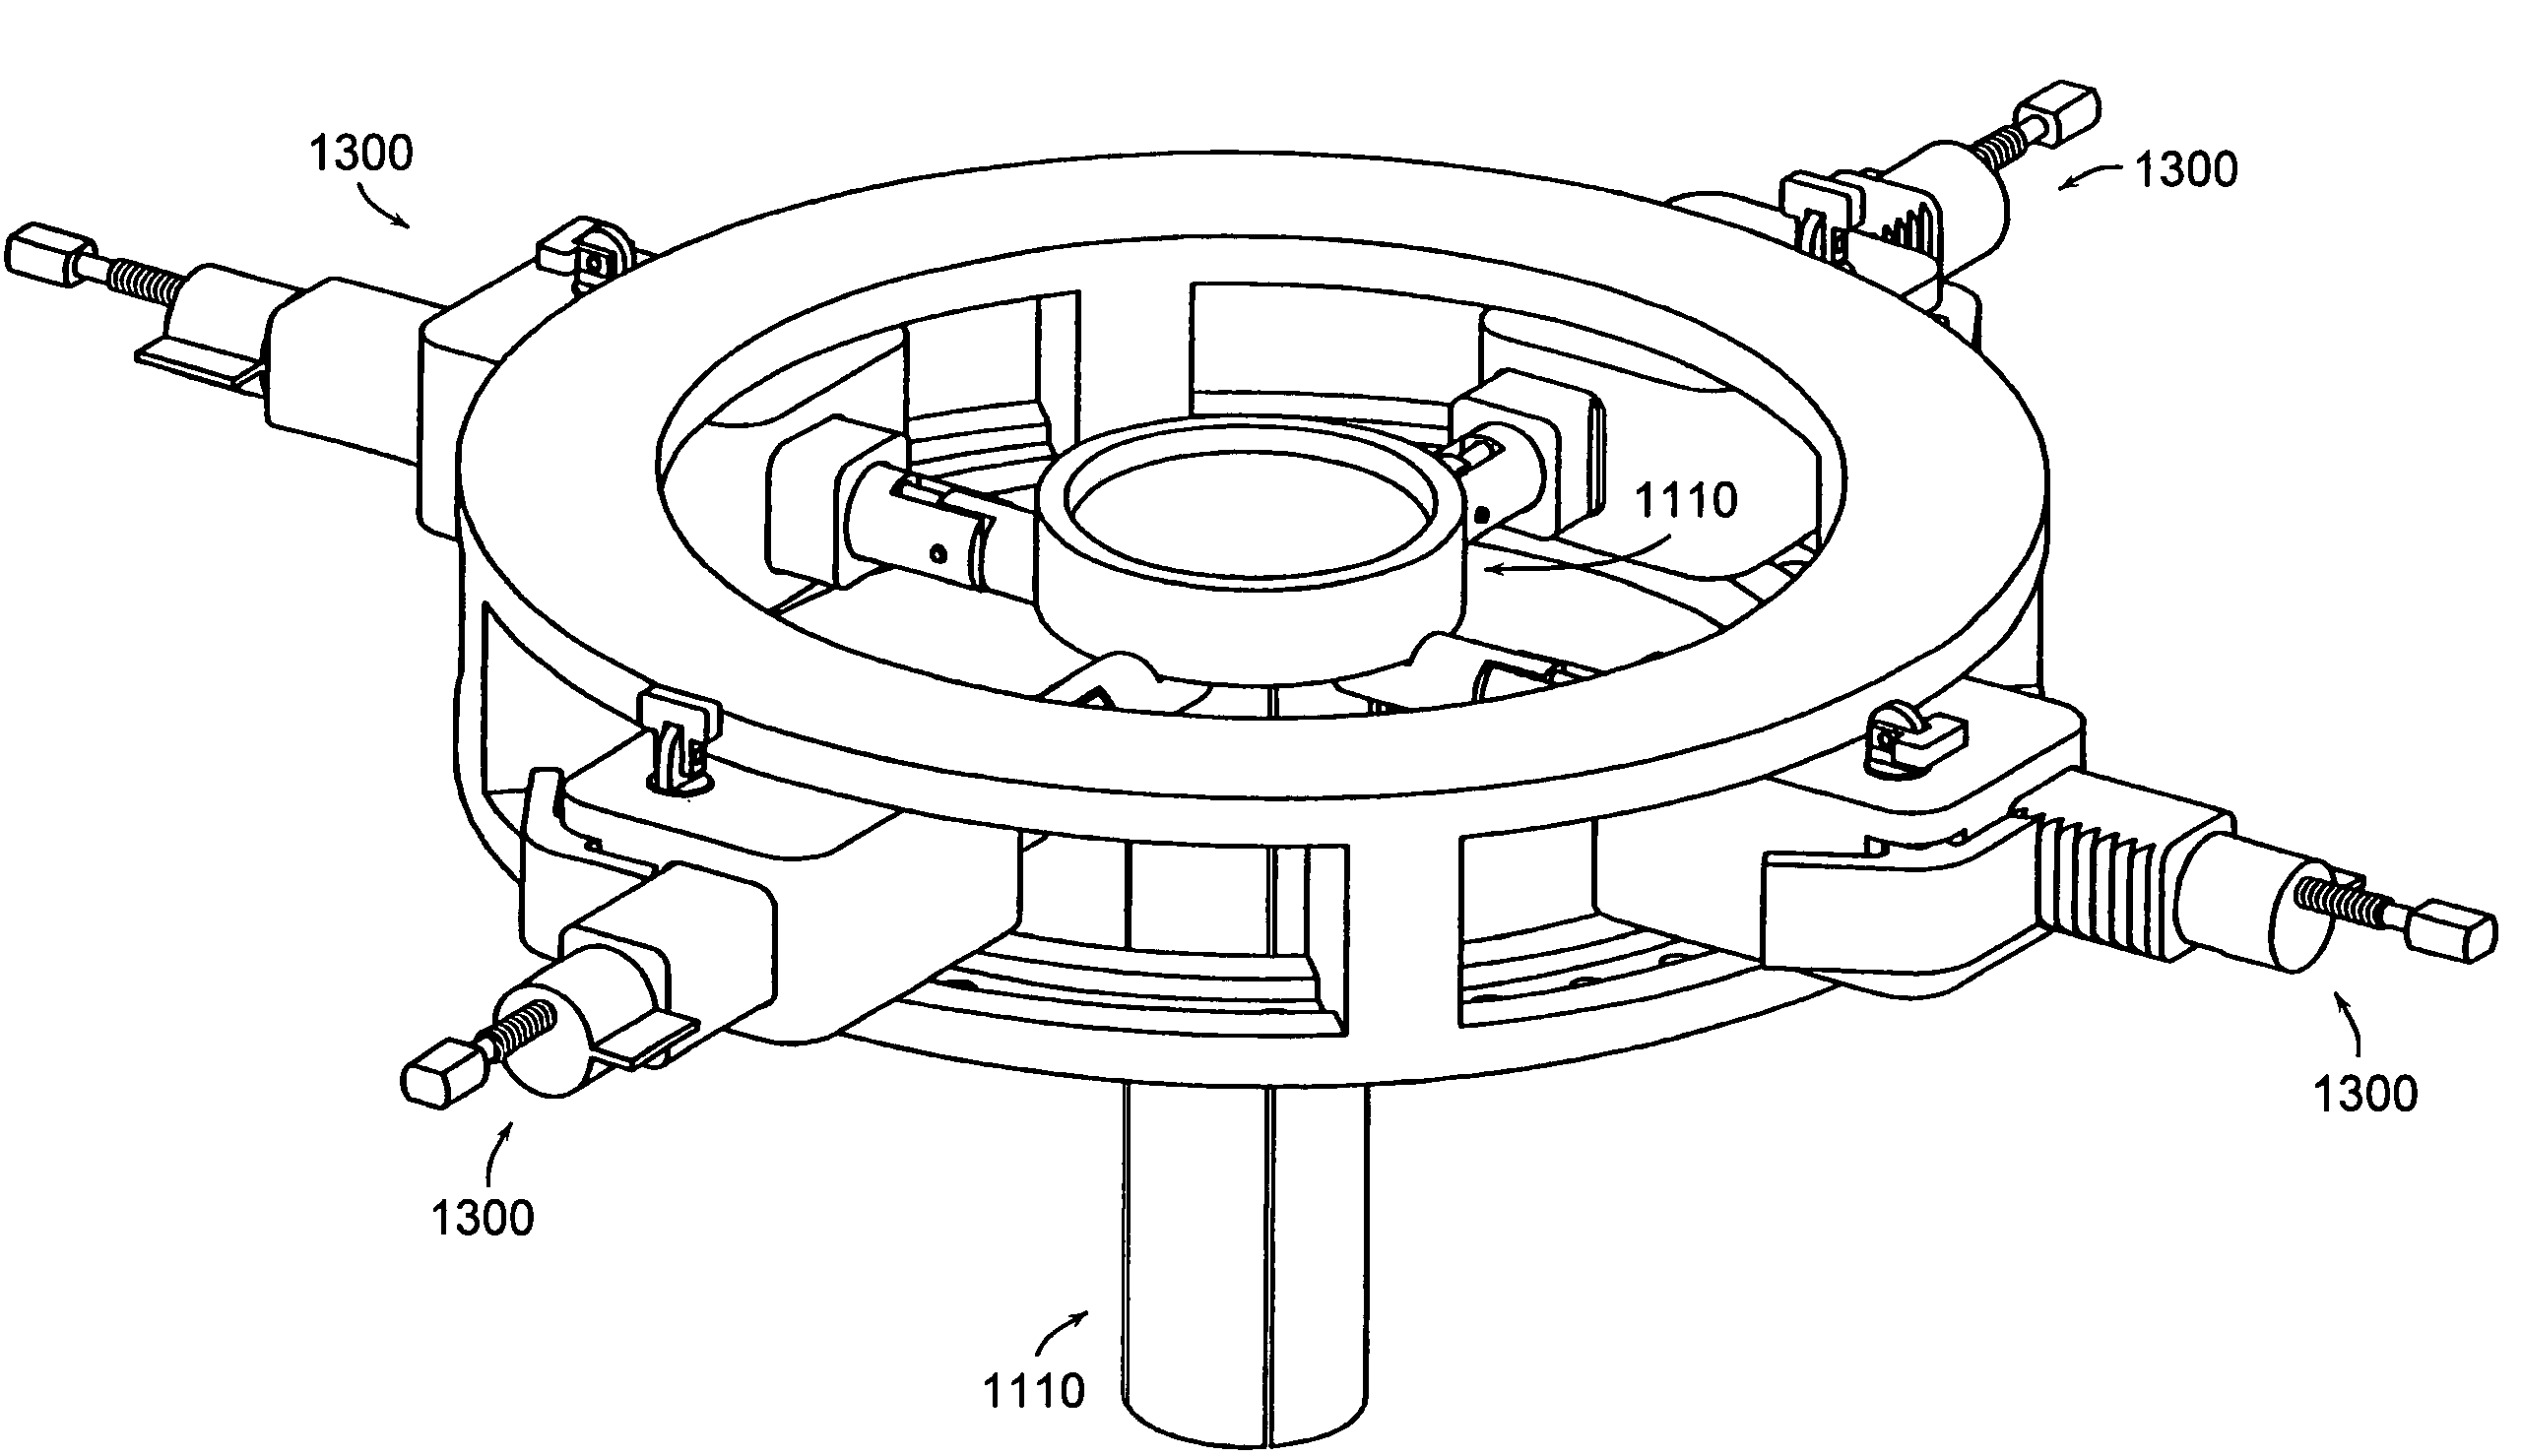 Surgical retractor positioning device